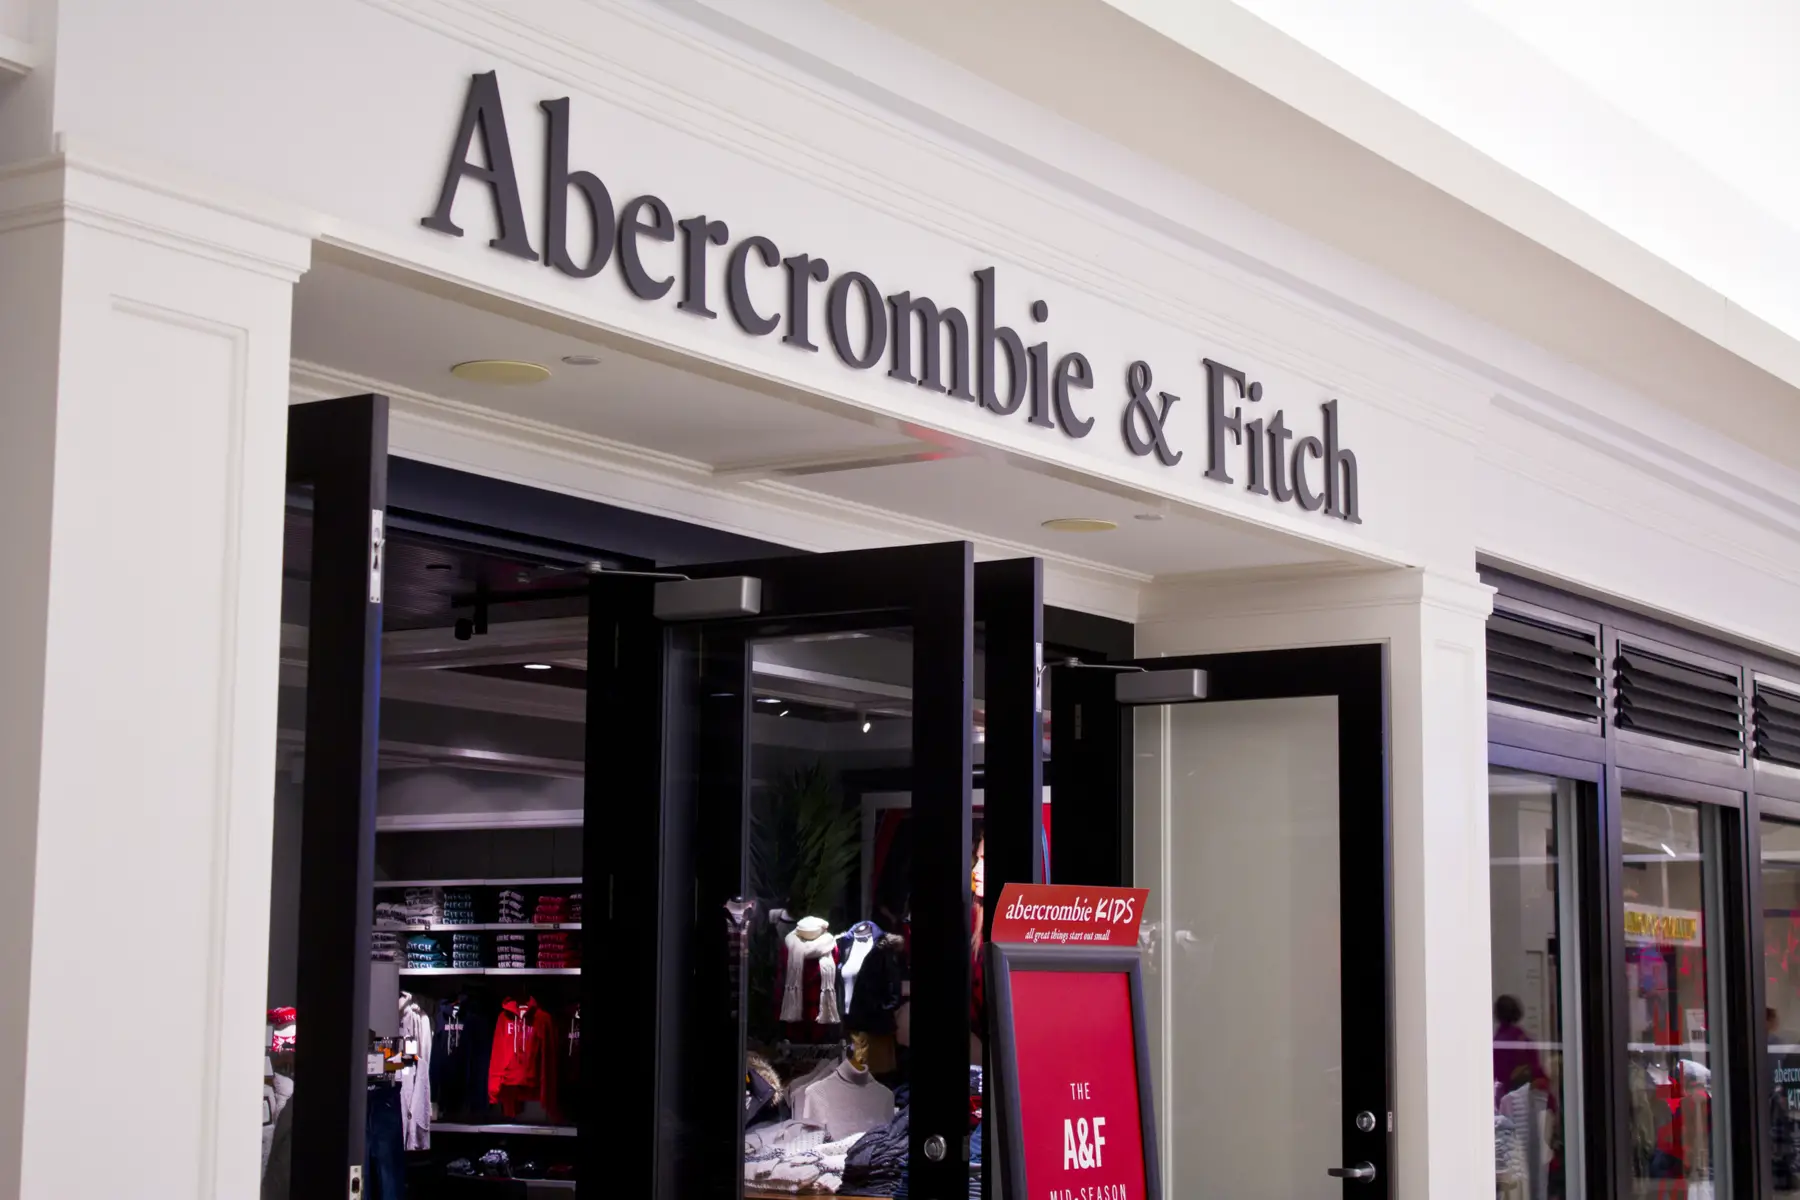 Abercrombie & Fitch store